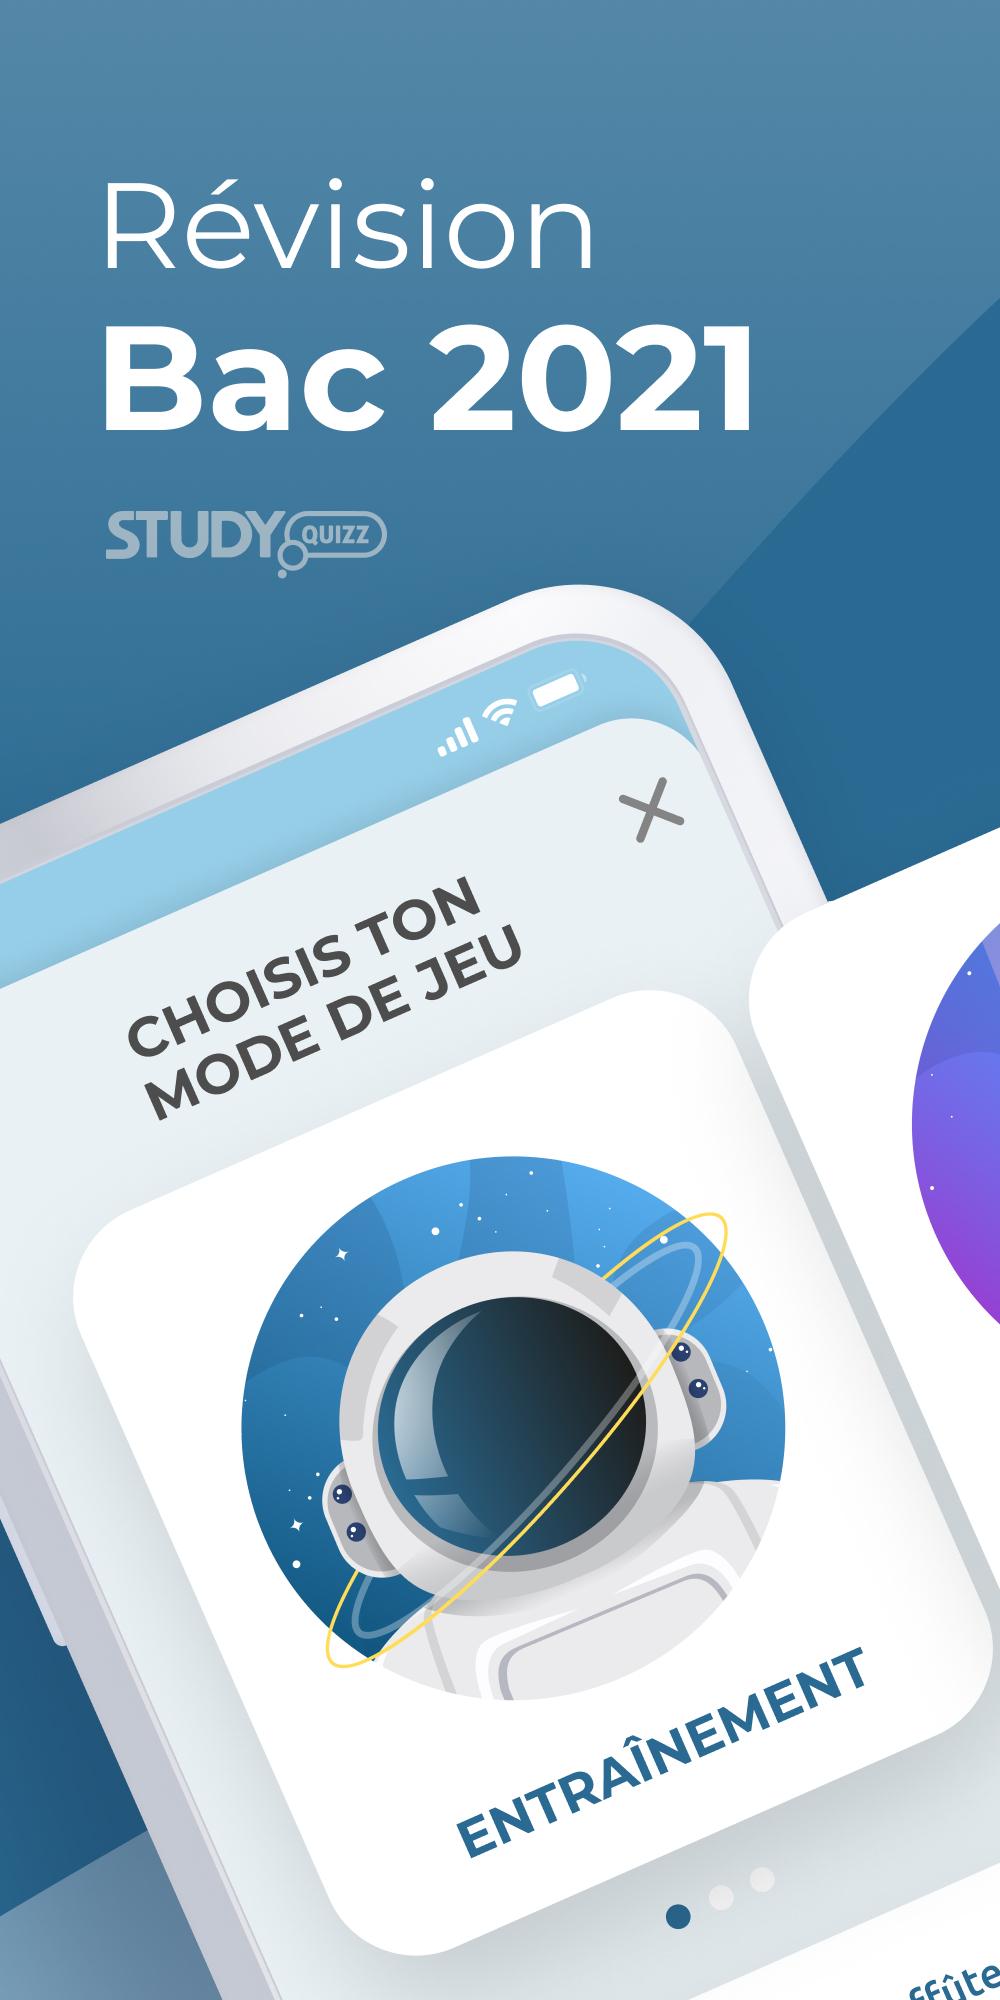 Révision BAC 2022 for Android - APK Download